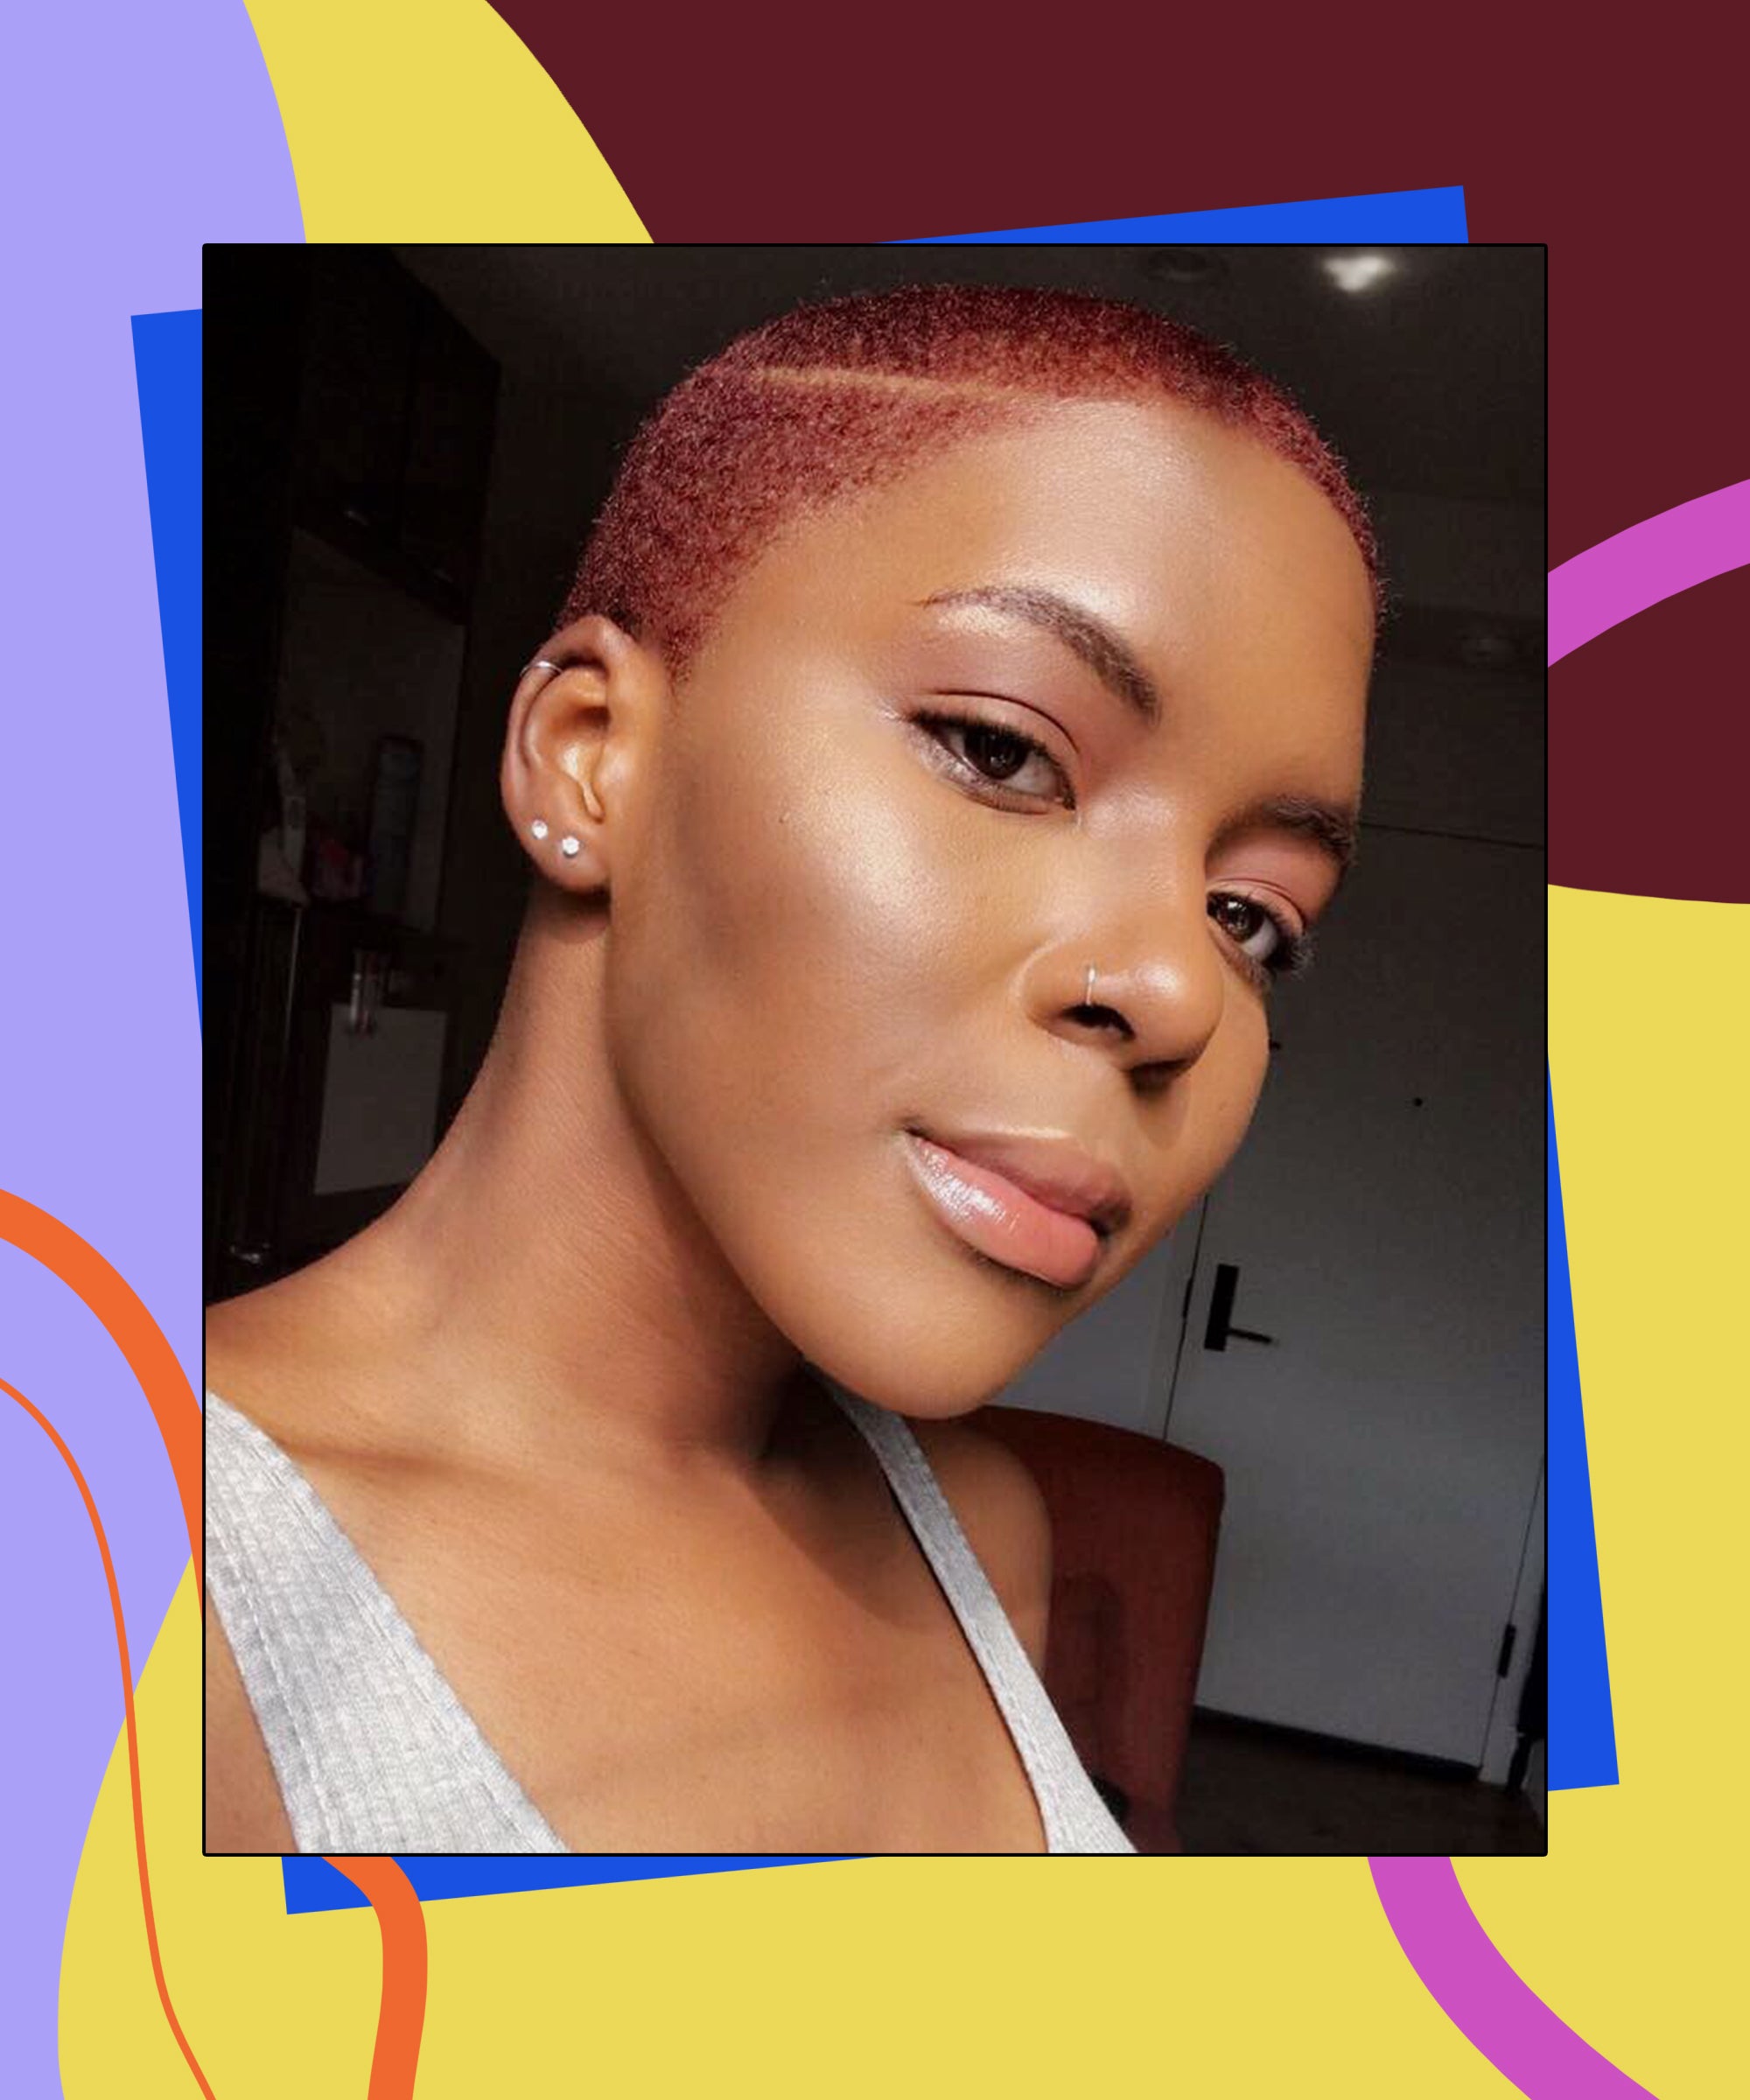 Sexyy Red Is Natural Hair Goals + Other Natural Hair Celebs